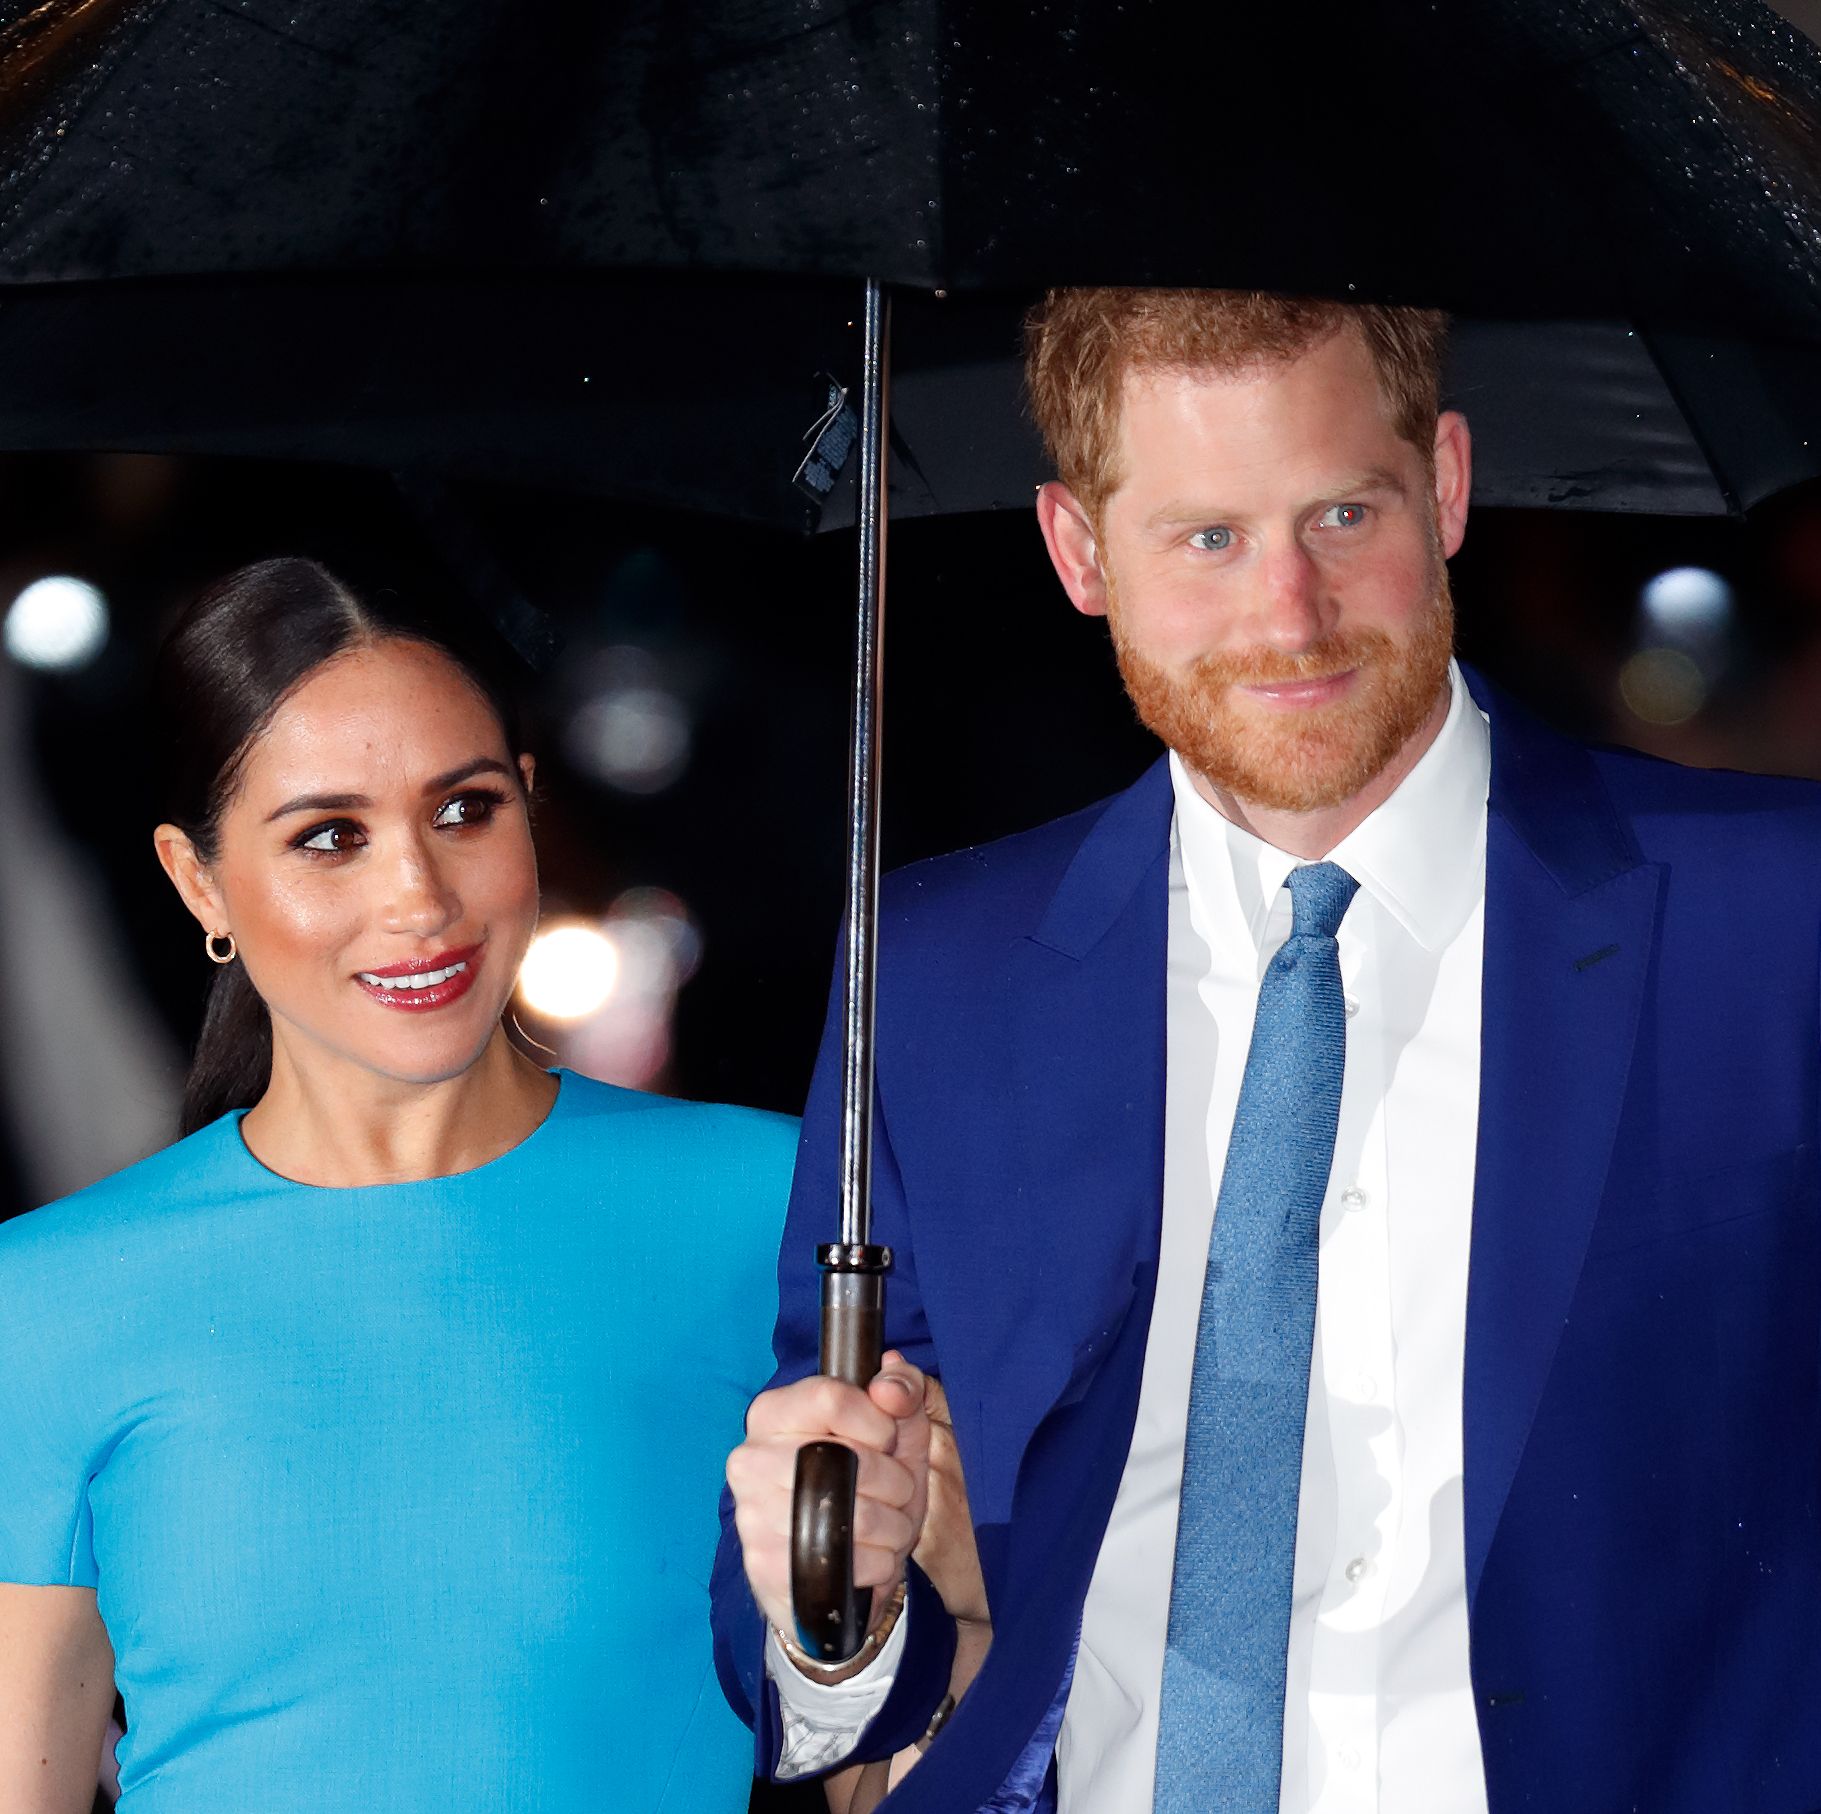 Prince Harry and Meghan Markle Originally Wanted to Move to a 